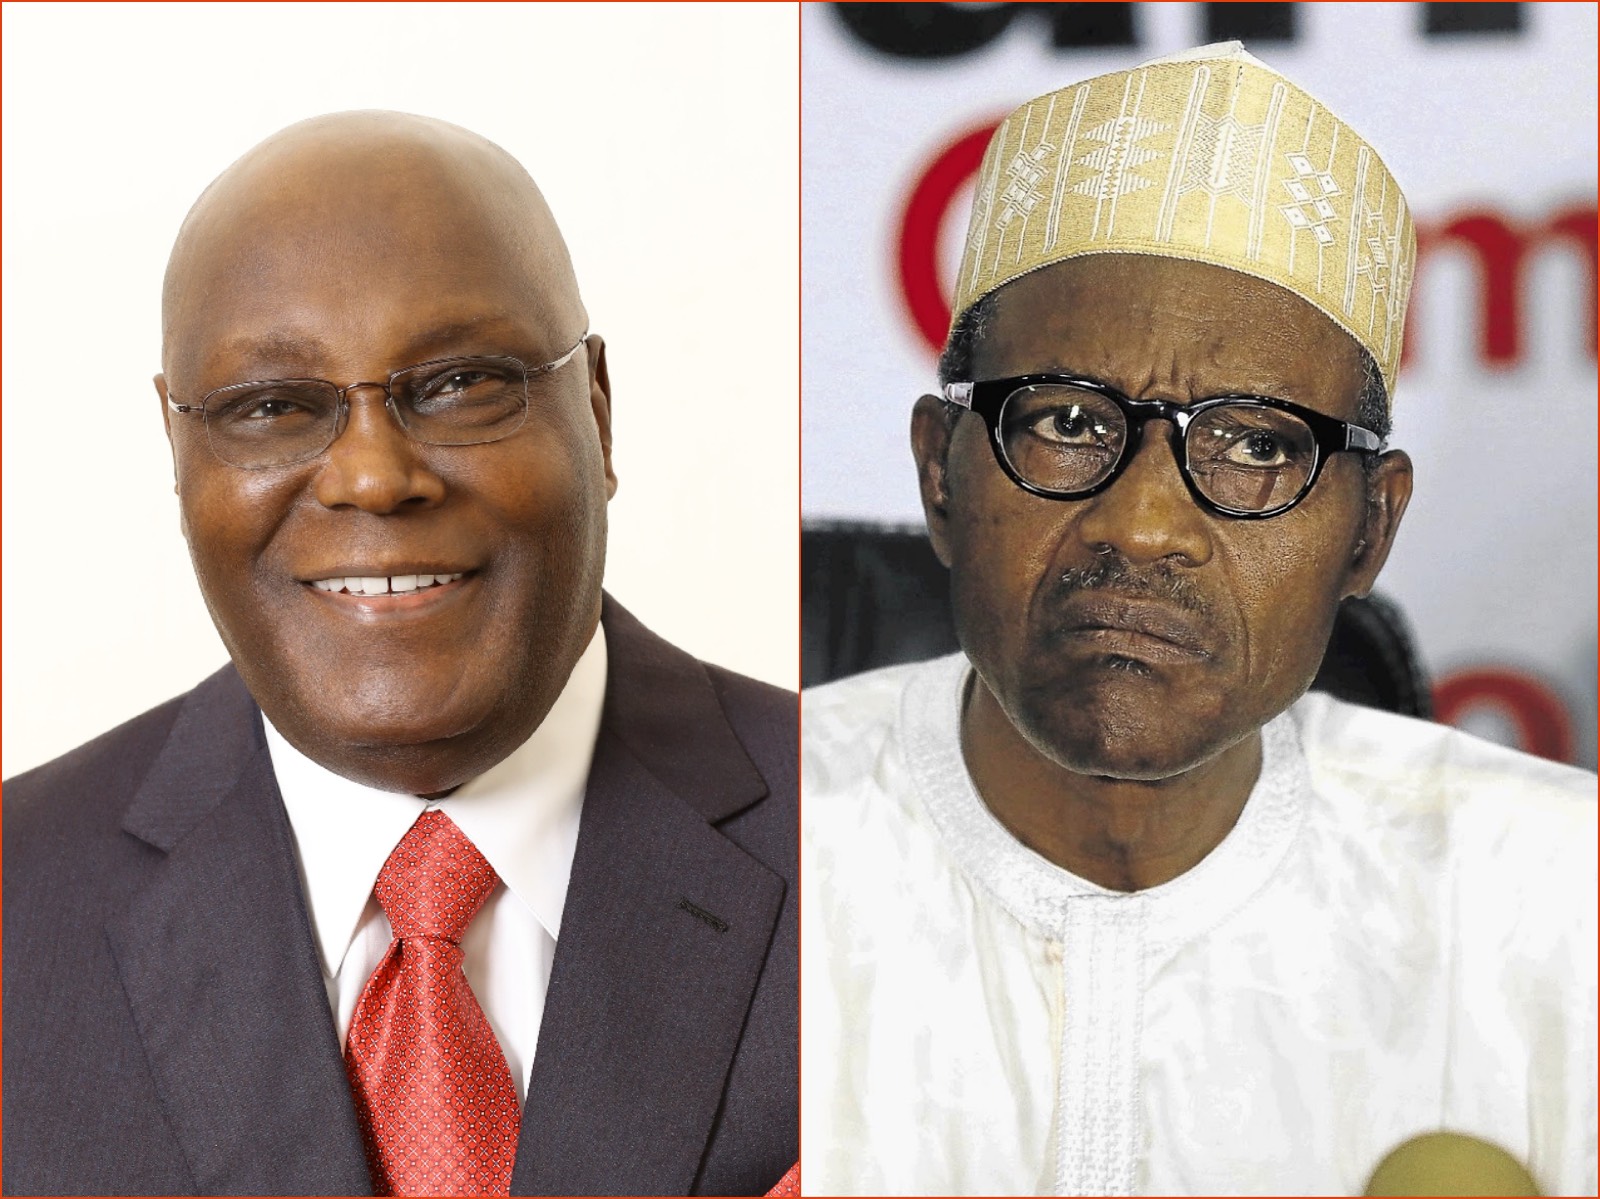 Nigeria Former Vice President Atiku Abubakar, the main challenger in the 2019 presidential elections (left) and Muhammadu Buhari, the incumbent president (right)